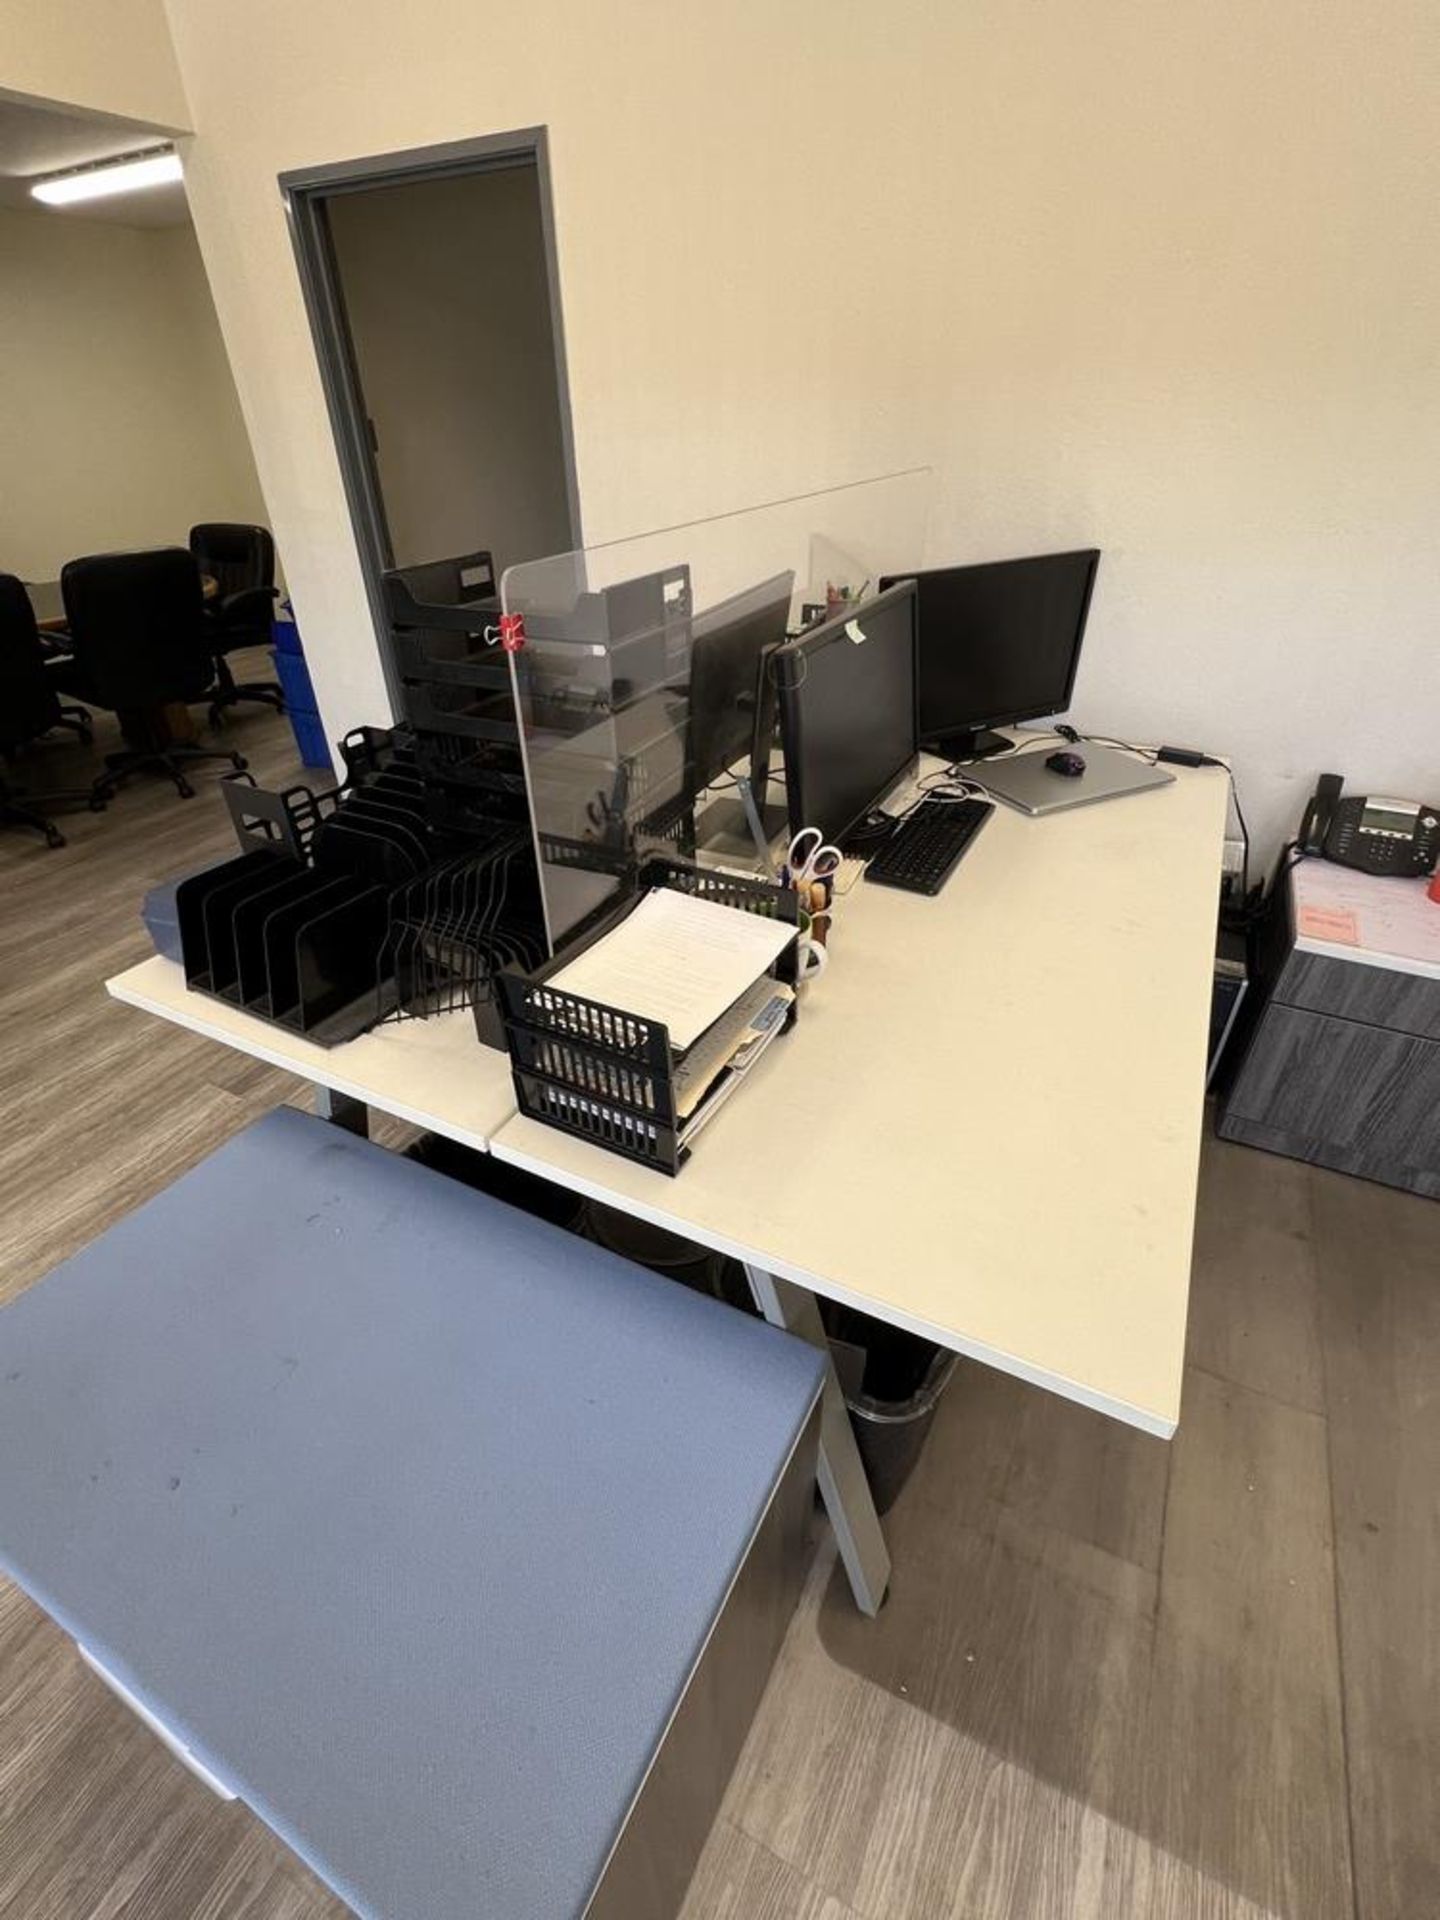 (3) Two Sided Office Desks 72" x 30" x 29 1/2", (6) Chairs, (7) 2 Drawer Filing Cabinets 35" x 22" x - Image 20 of 25